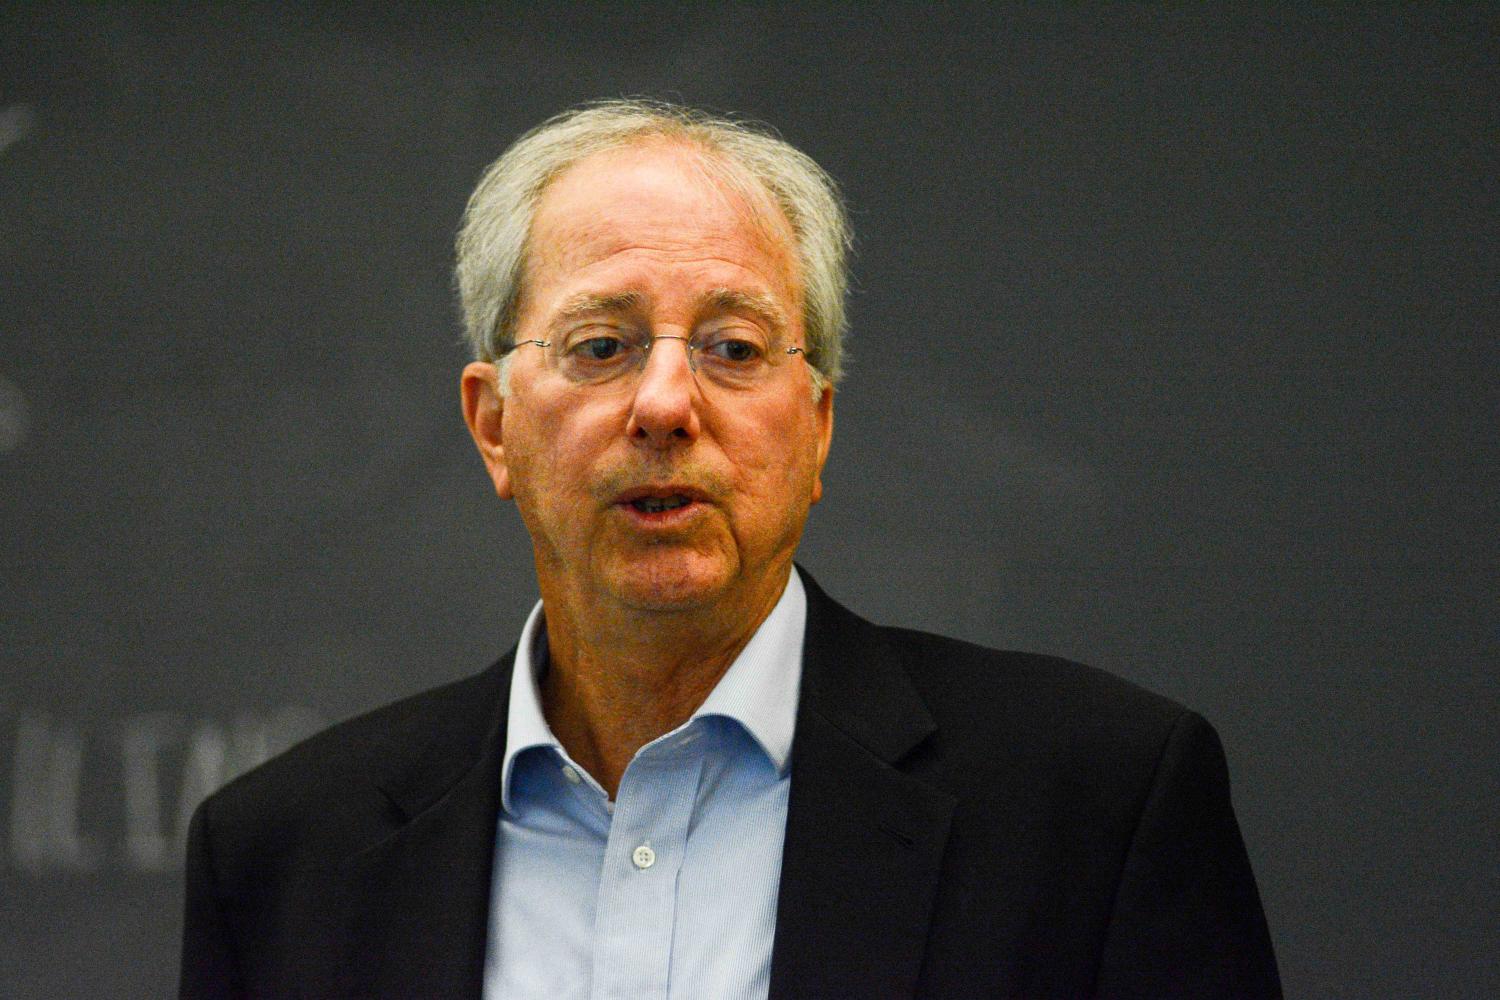 Ambassador Dennis Ross spoke to students in Lincoln Hall on April 27. He discussed conflict in the Middle East and the time he served under two different presidents.